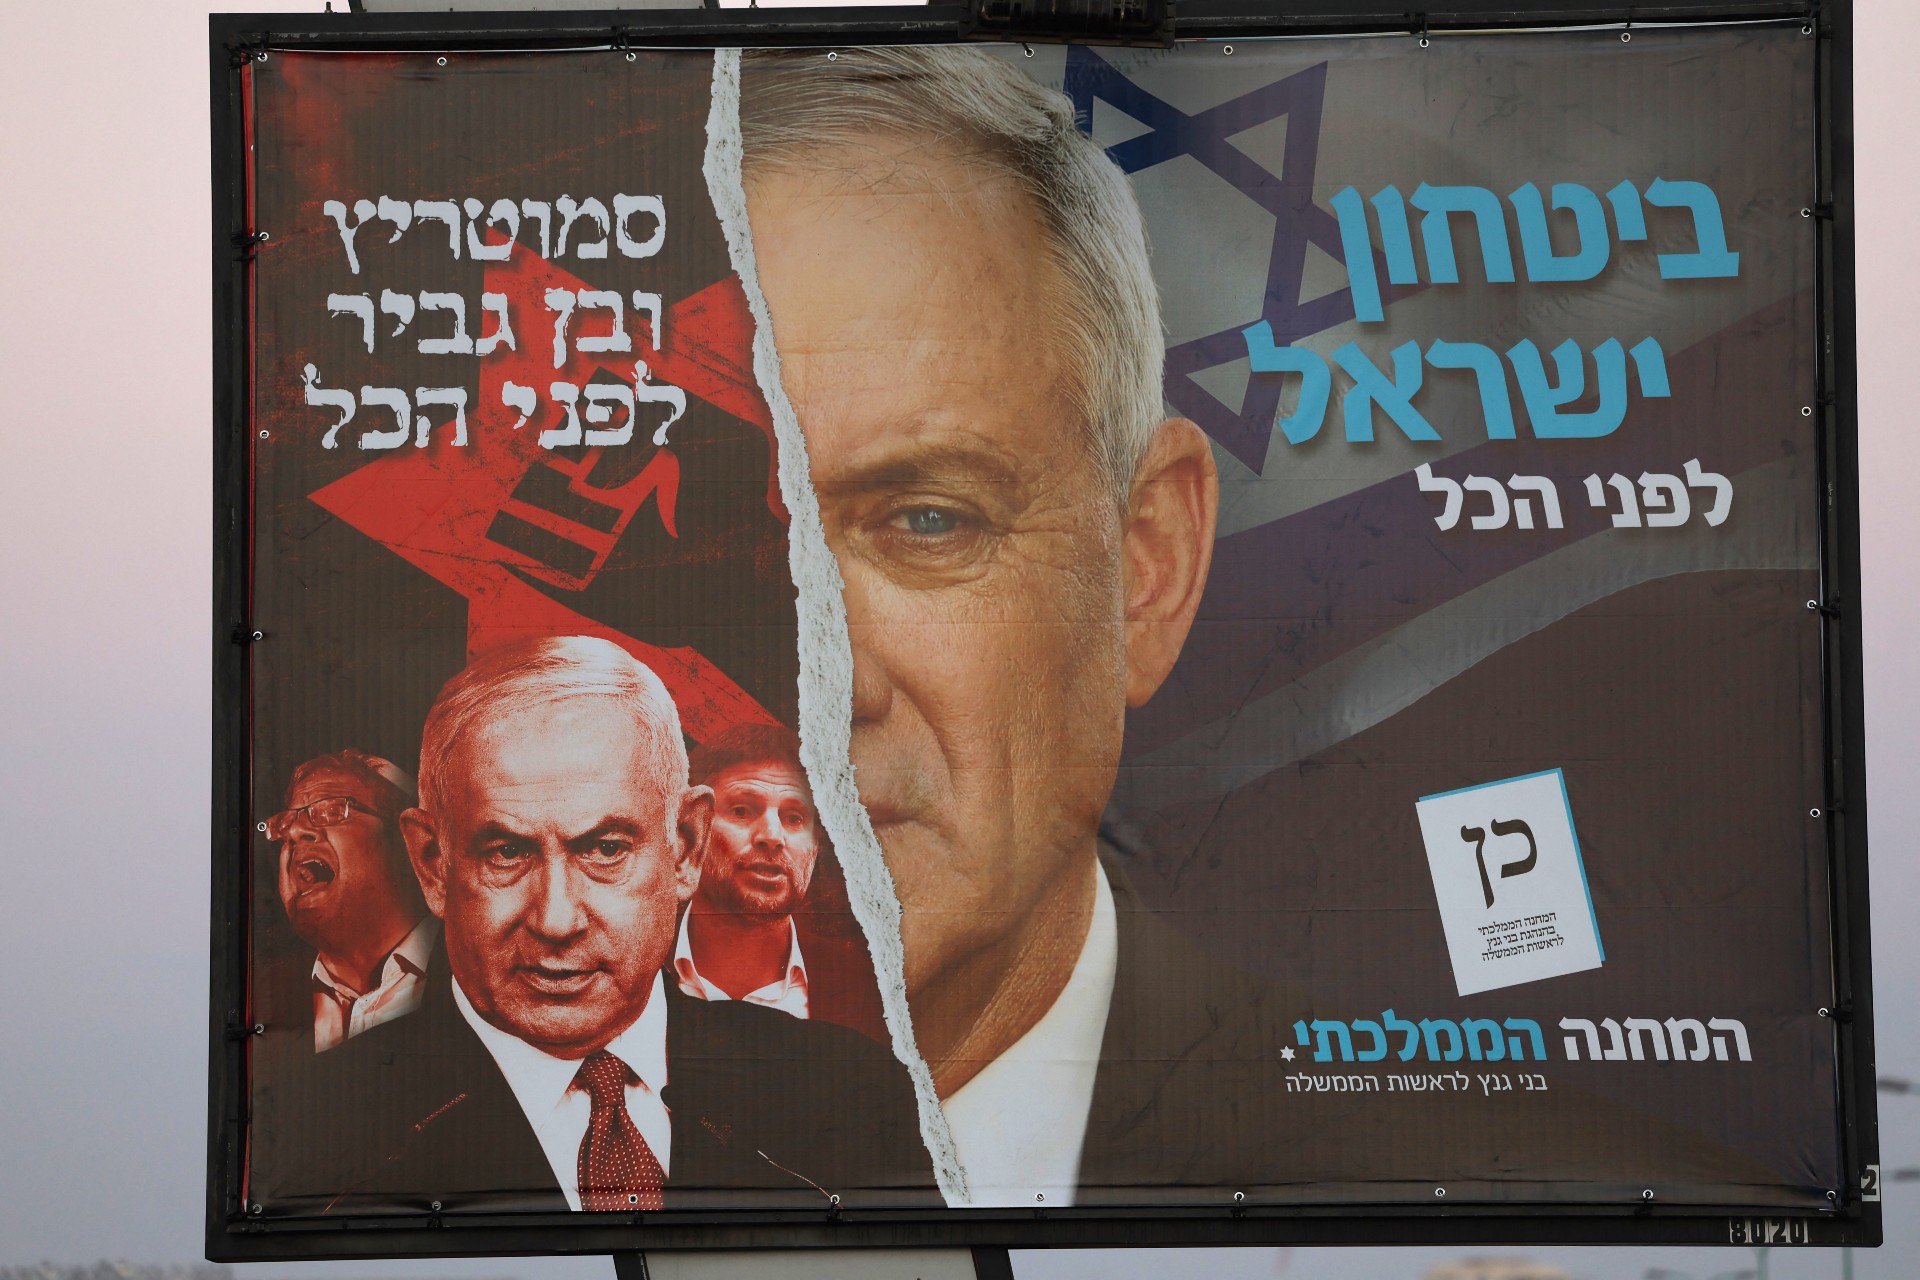 An electoral banner for Israel's National Unity party in Tel Aviv (AFP)